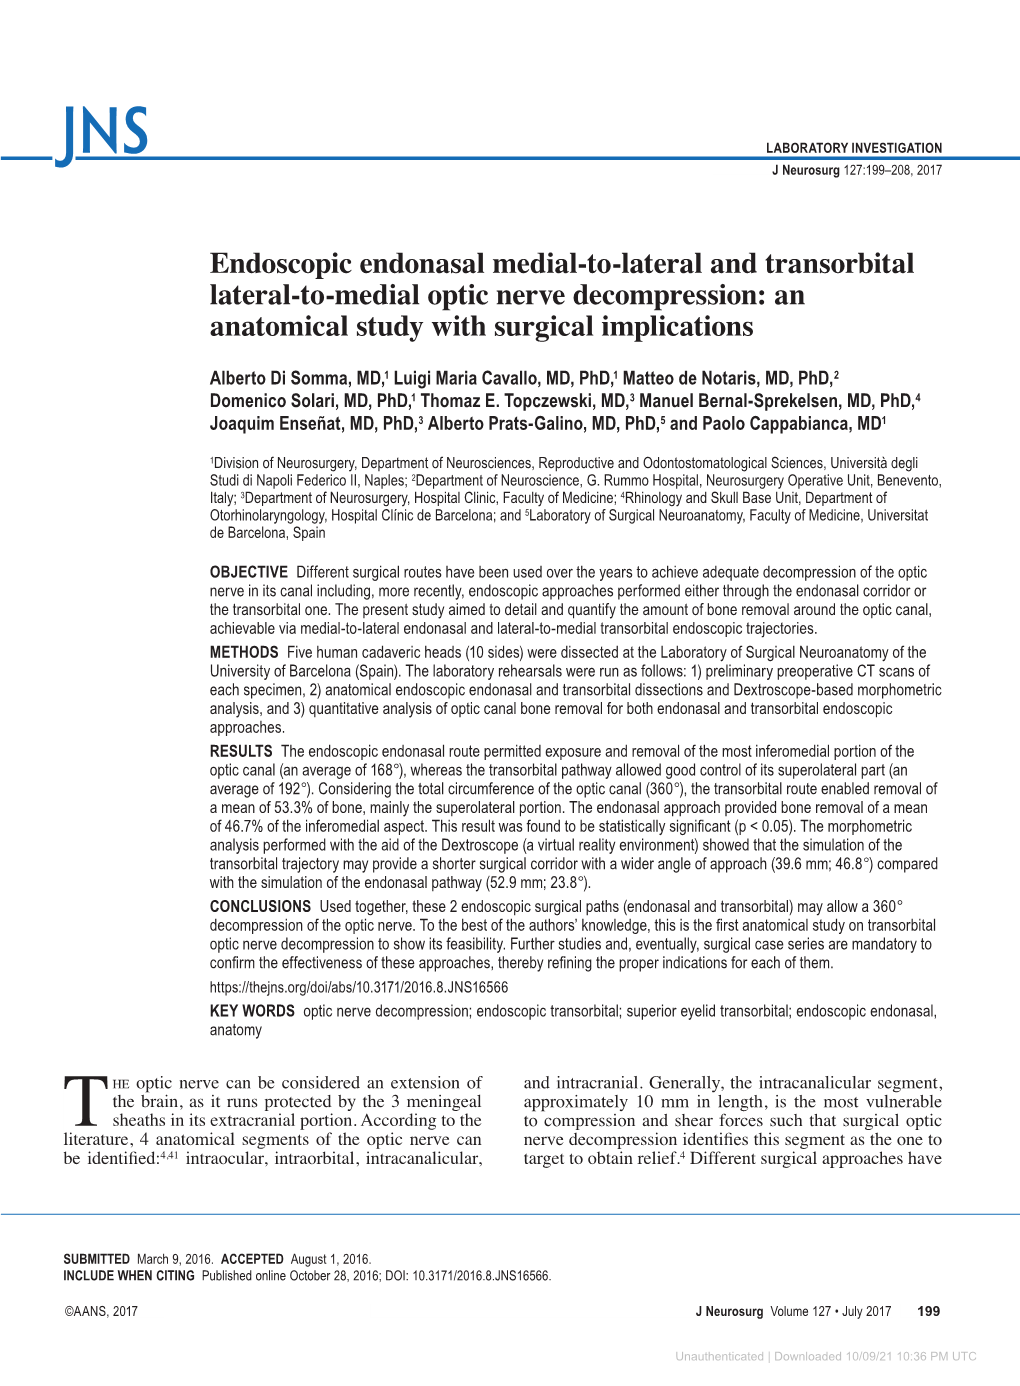 Endoscopic Endonasal Medial-To-Lateral and Transorbital Lateral-To-Medial Optic Nerve Decompression: an Anatomical Study with Surgical Implications